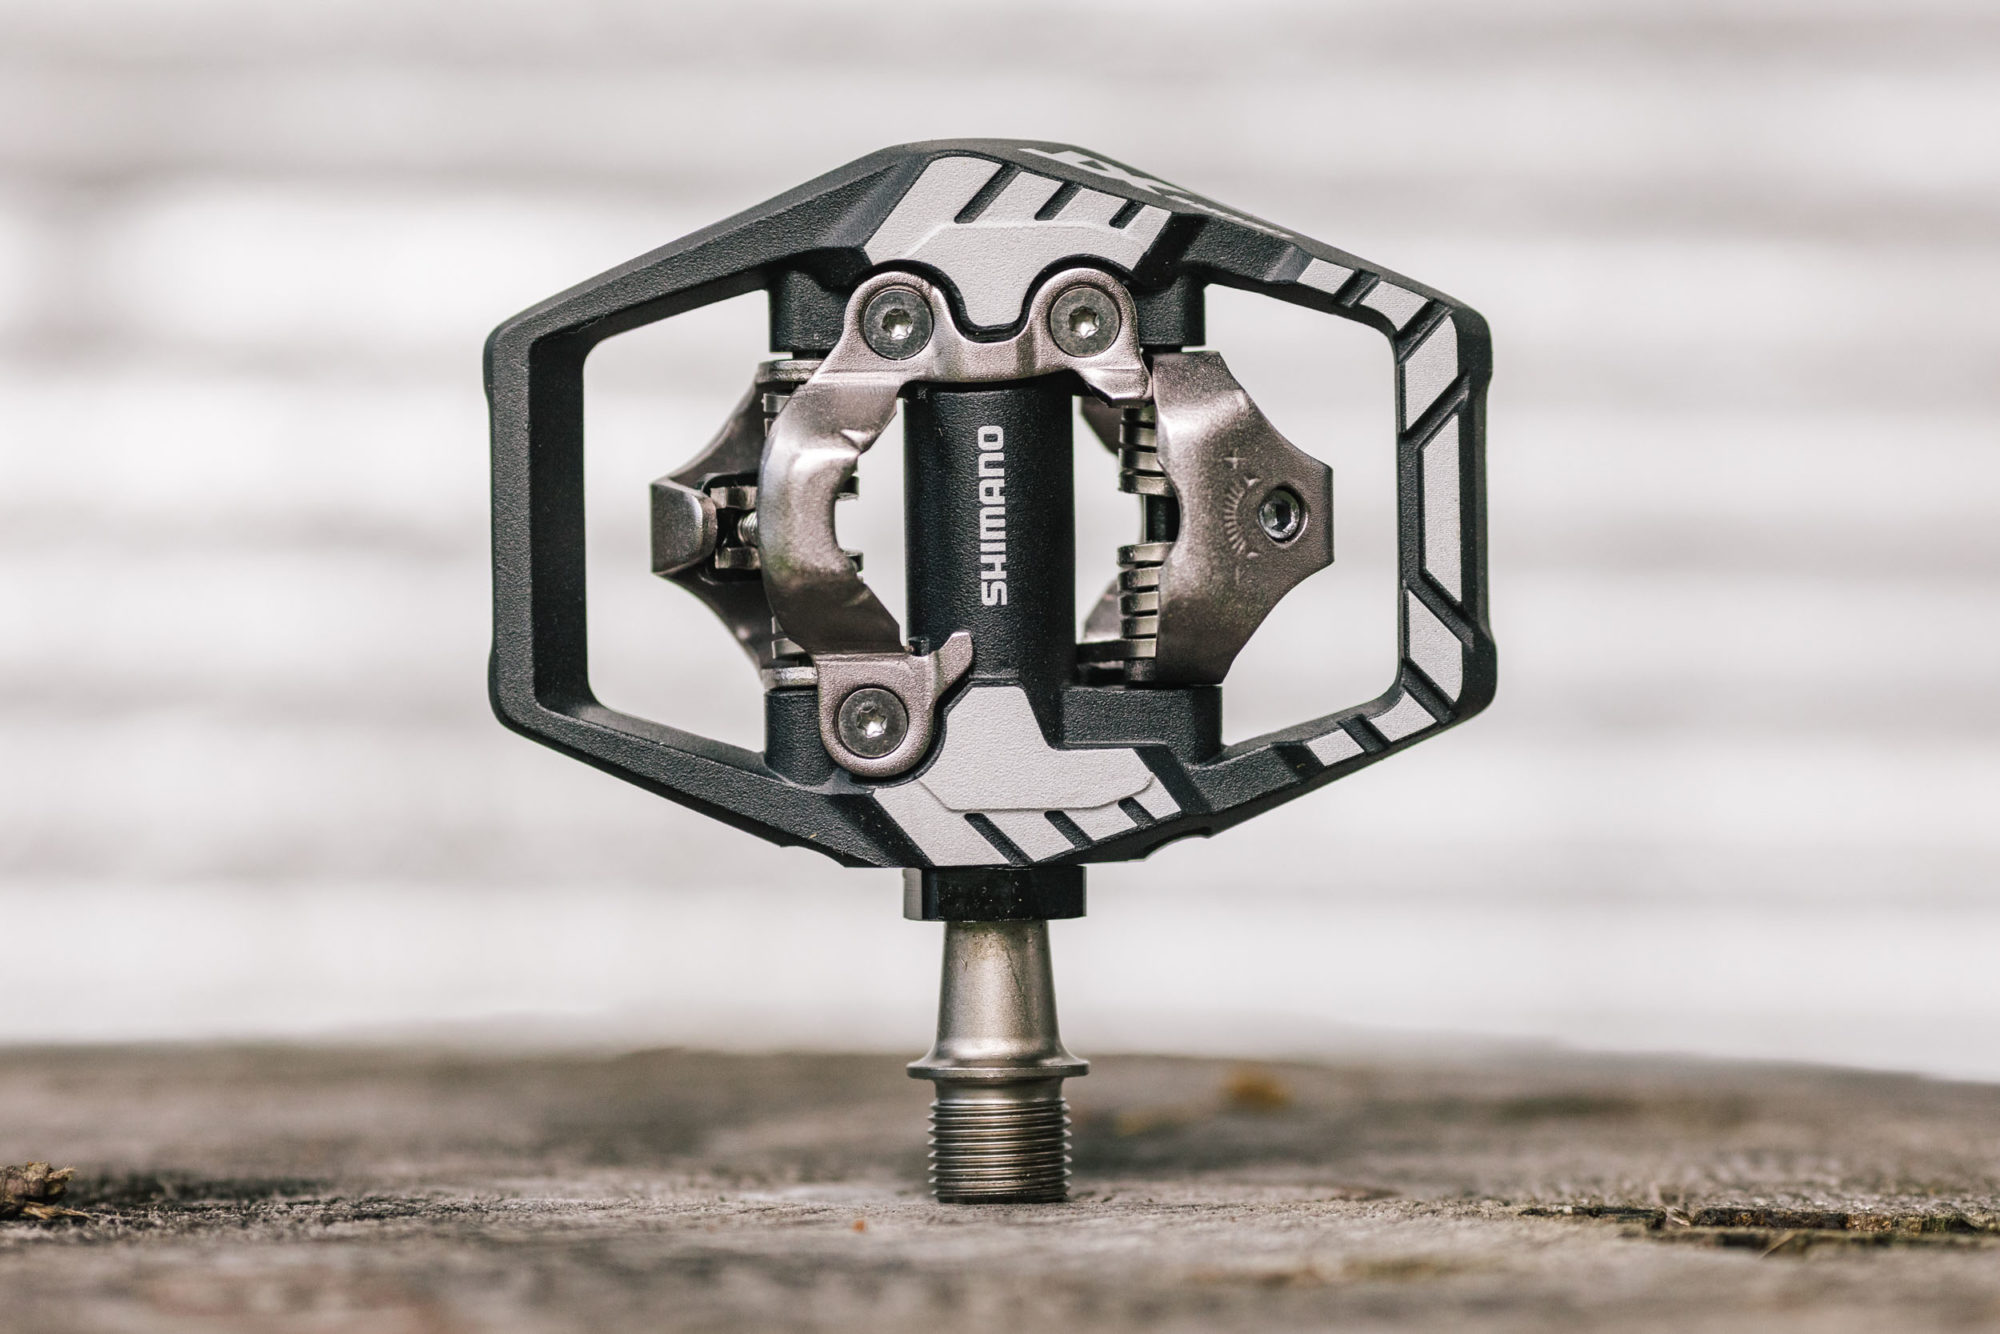 Shimano PD-M8120 XT Pedal Review, best pedals for bikepacking